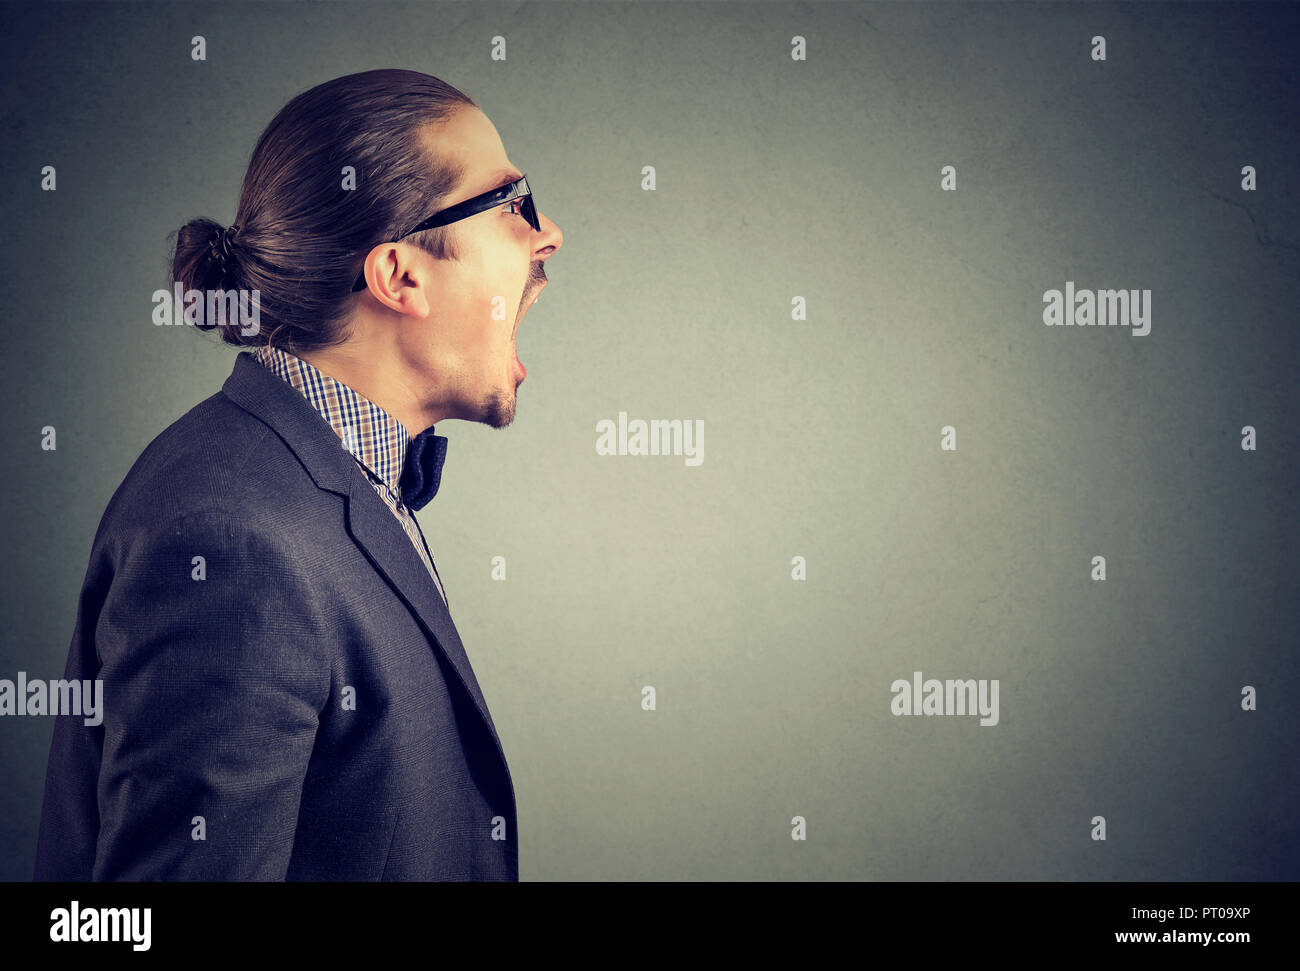 Side view of an angry man in rage shouting loudly with mouth opened on gray background. Stock Photo